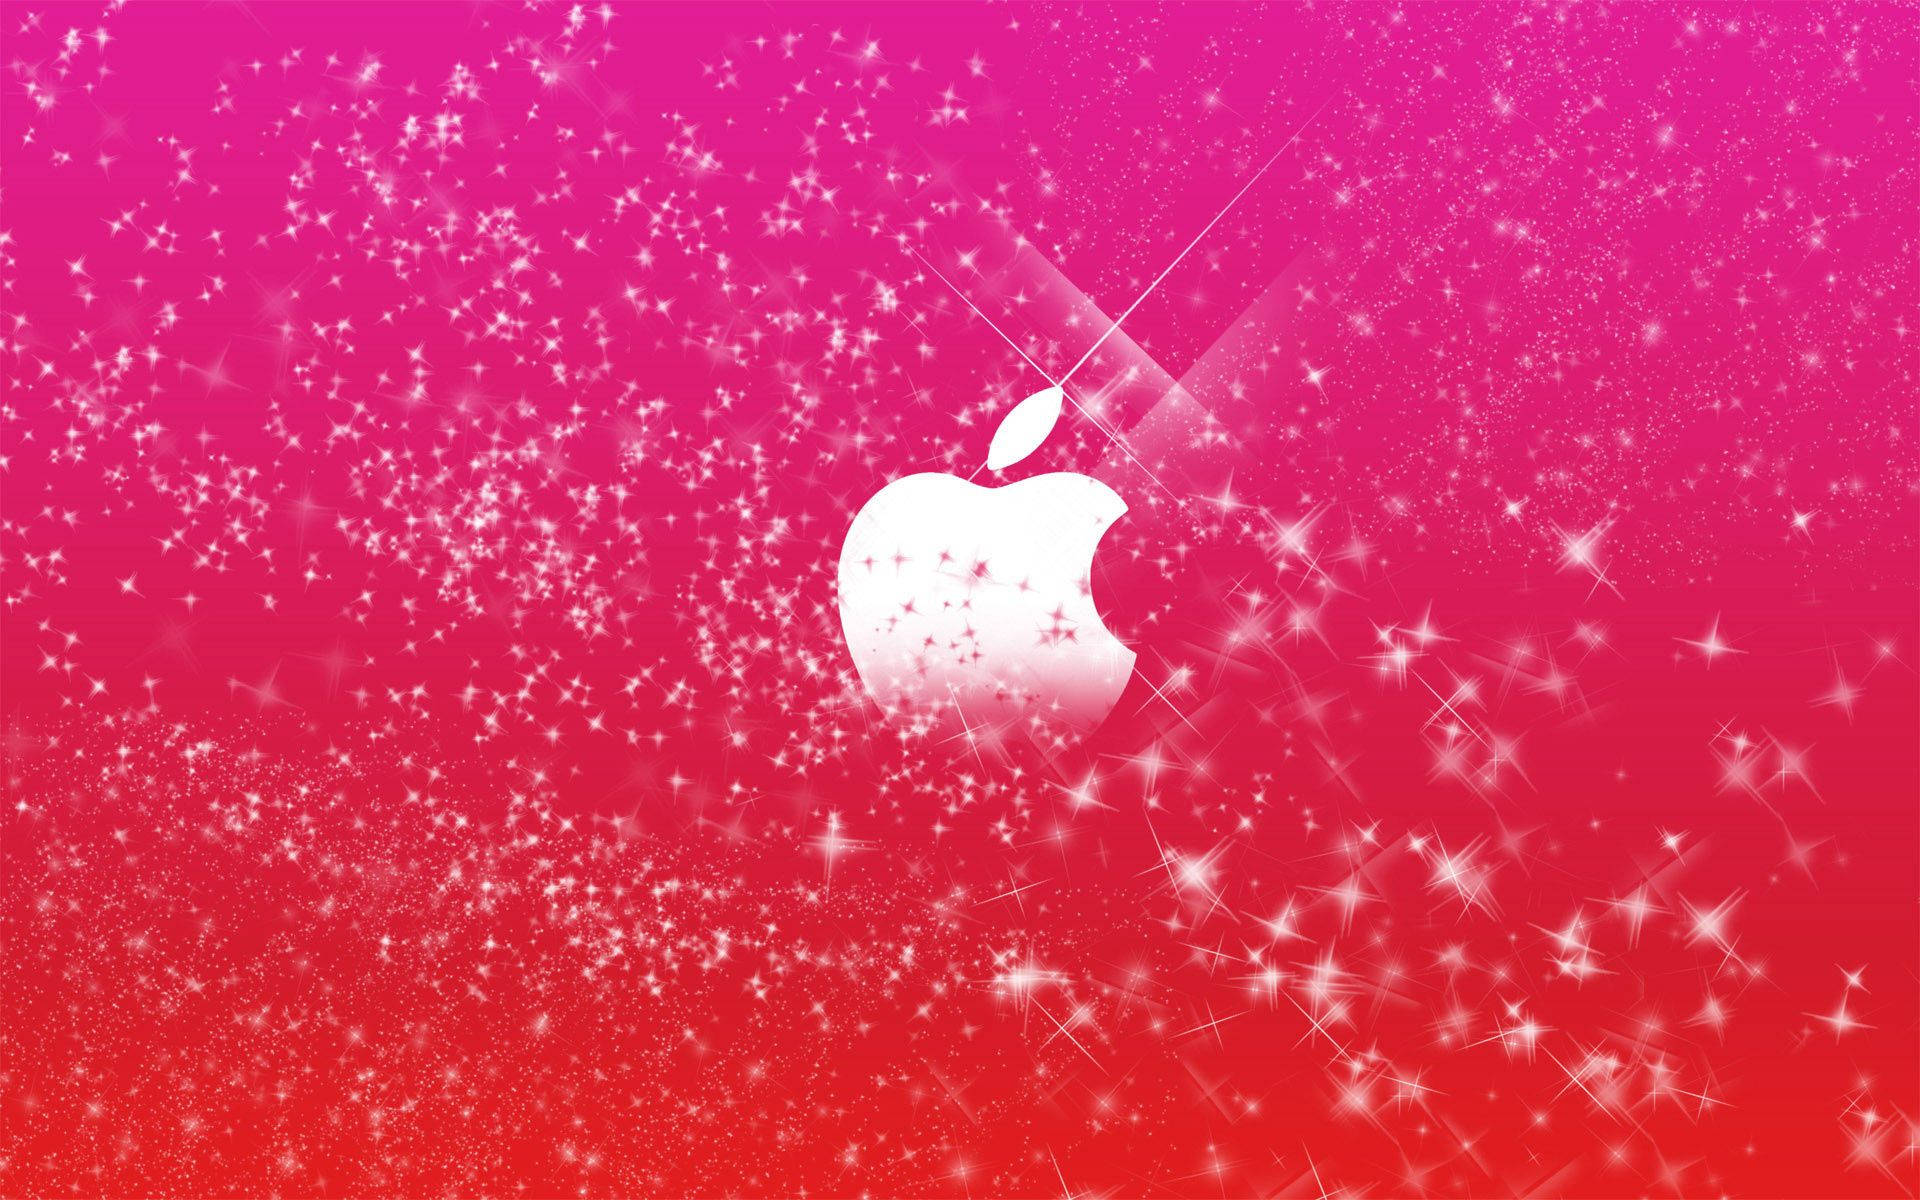 Adopt a Glittery Girly Style with this Apple Logo Wallpaper